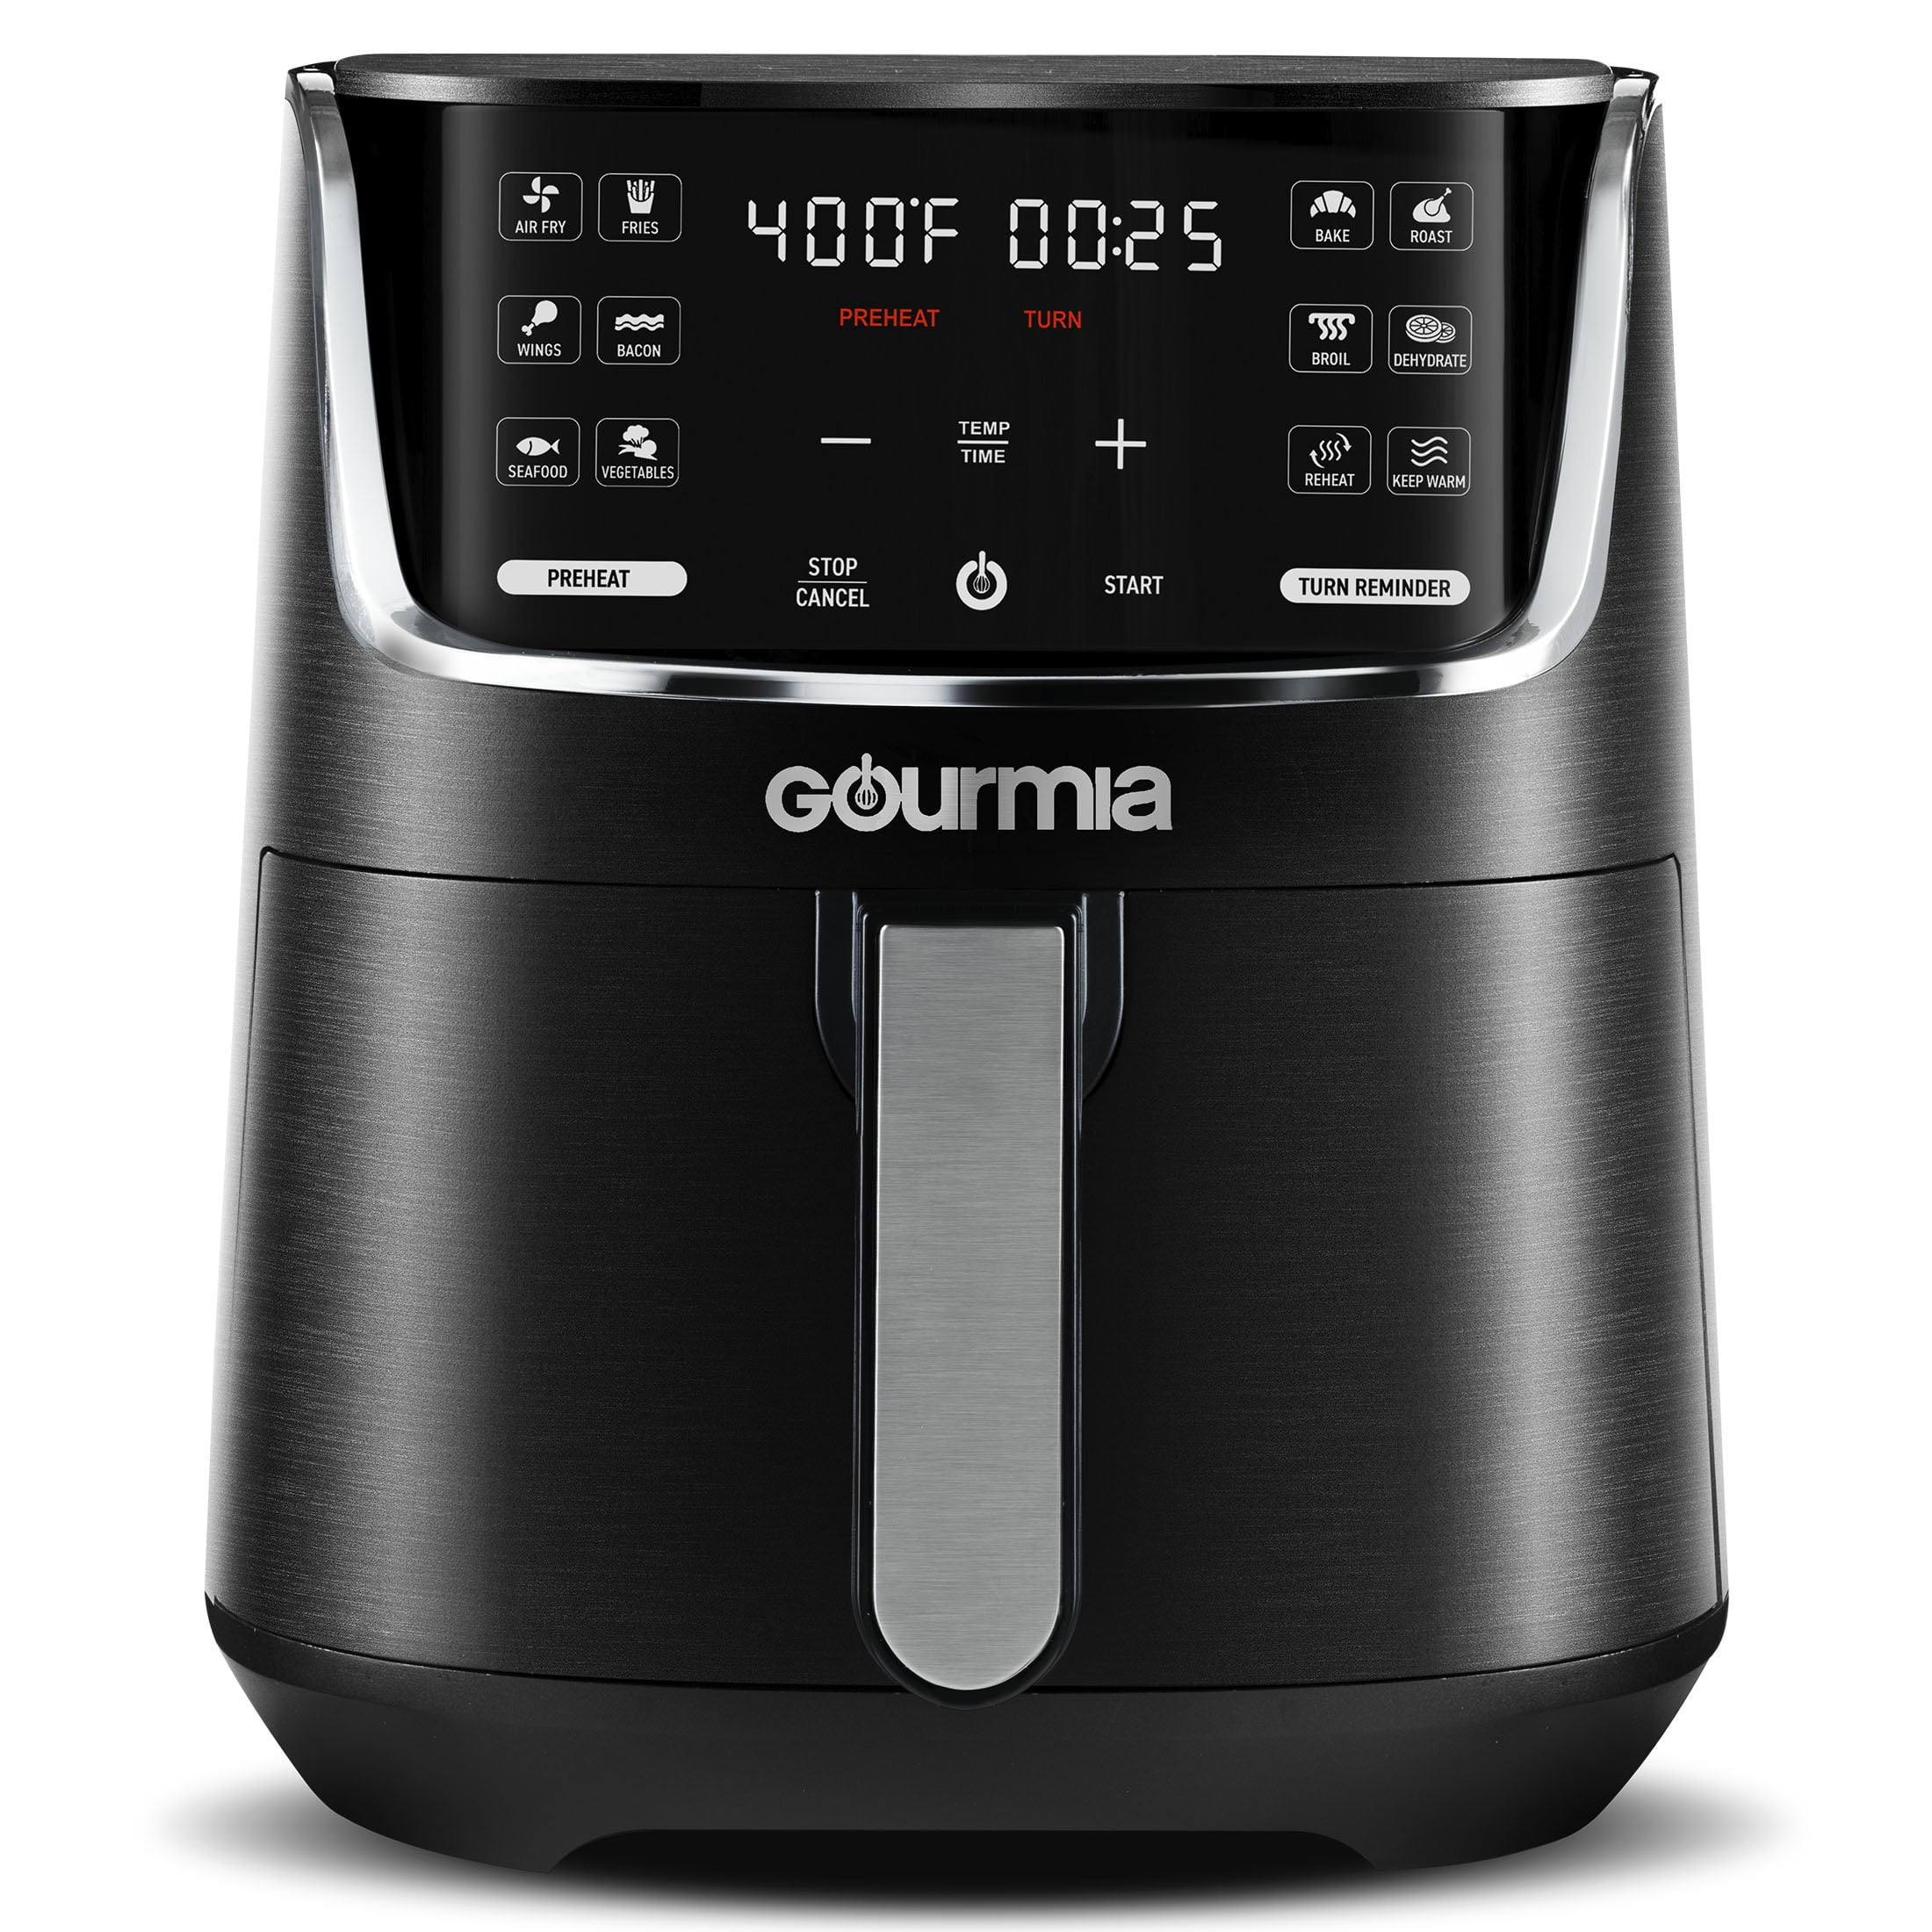 Gourmia Air Fryer Oven Digital Display 8 Quart Large AirFryer Cooker 12  Touch Cooking Presets, XL Air Fryer Basket 1700w Power Multifunction GAF856